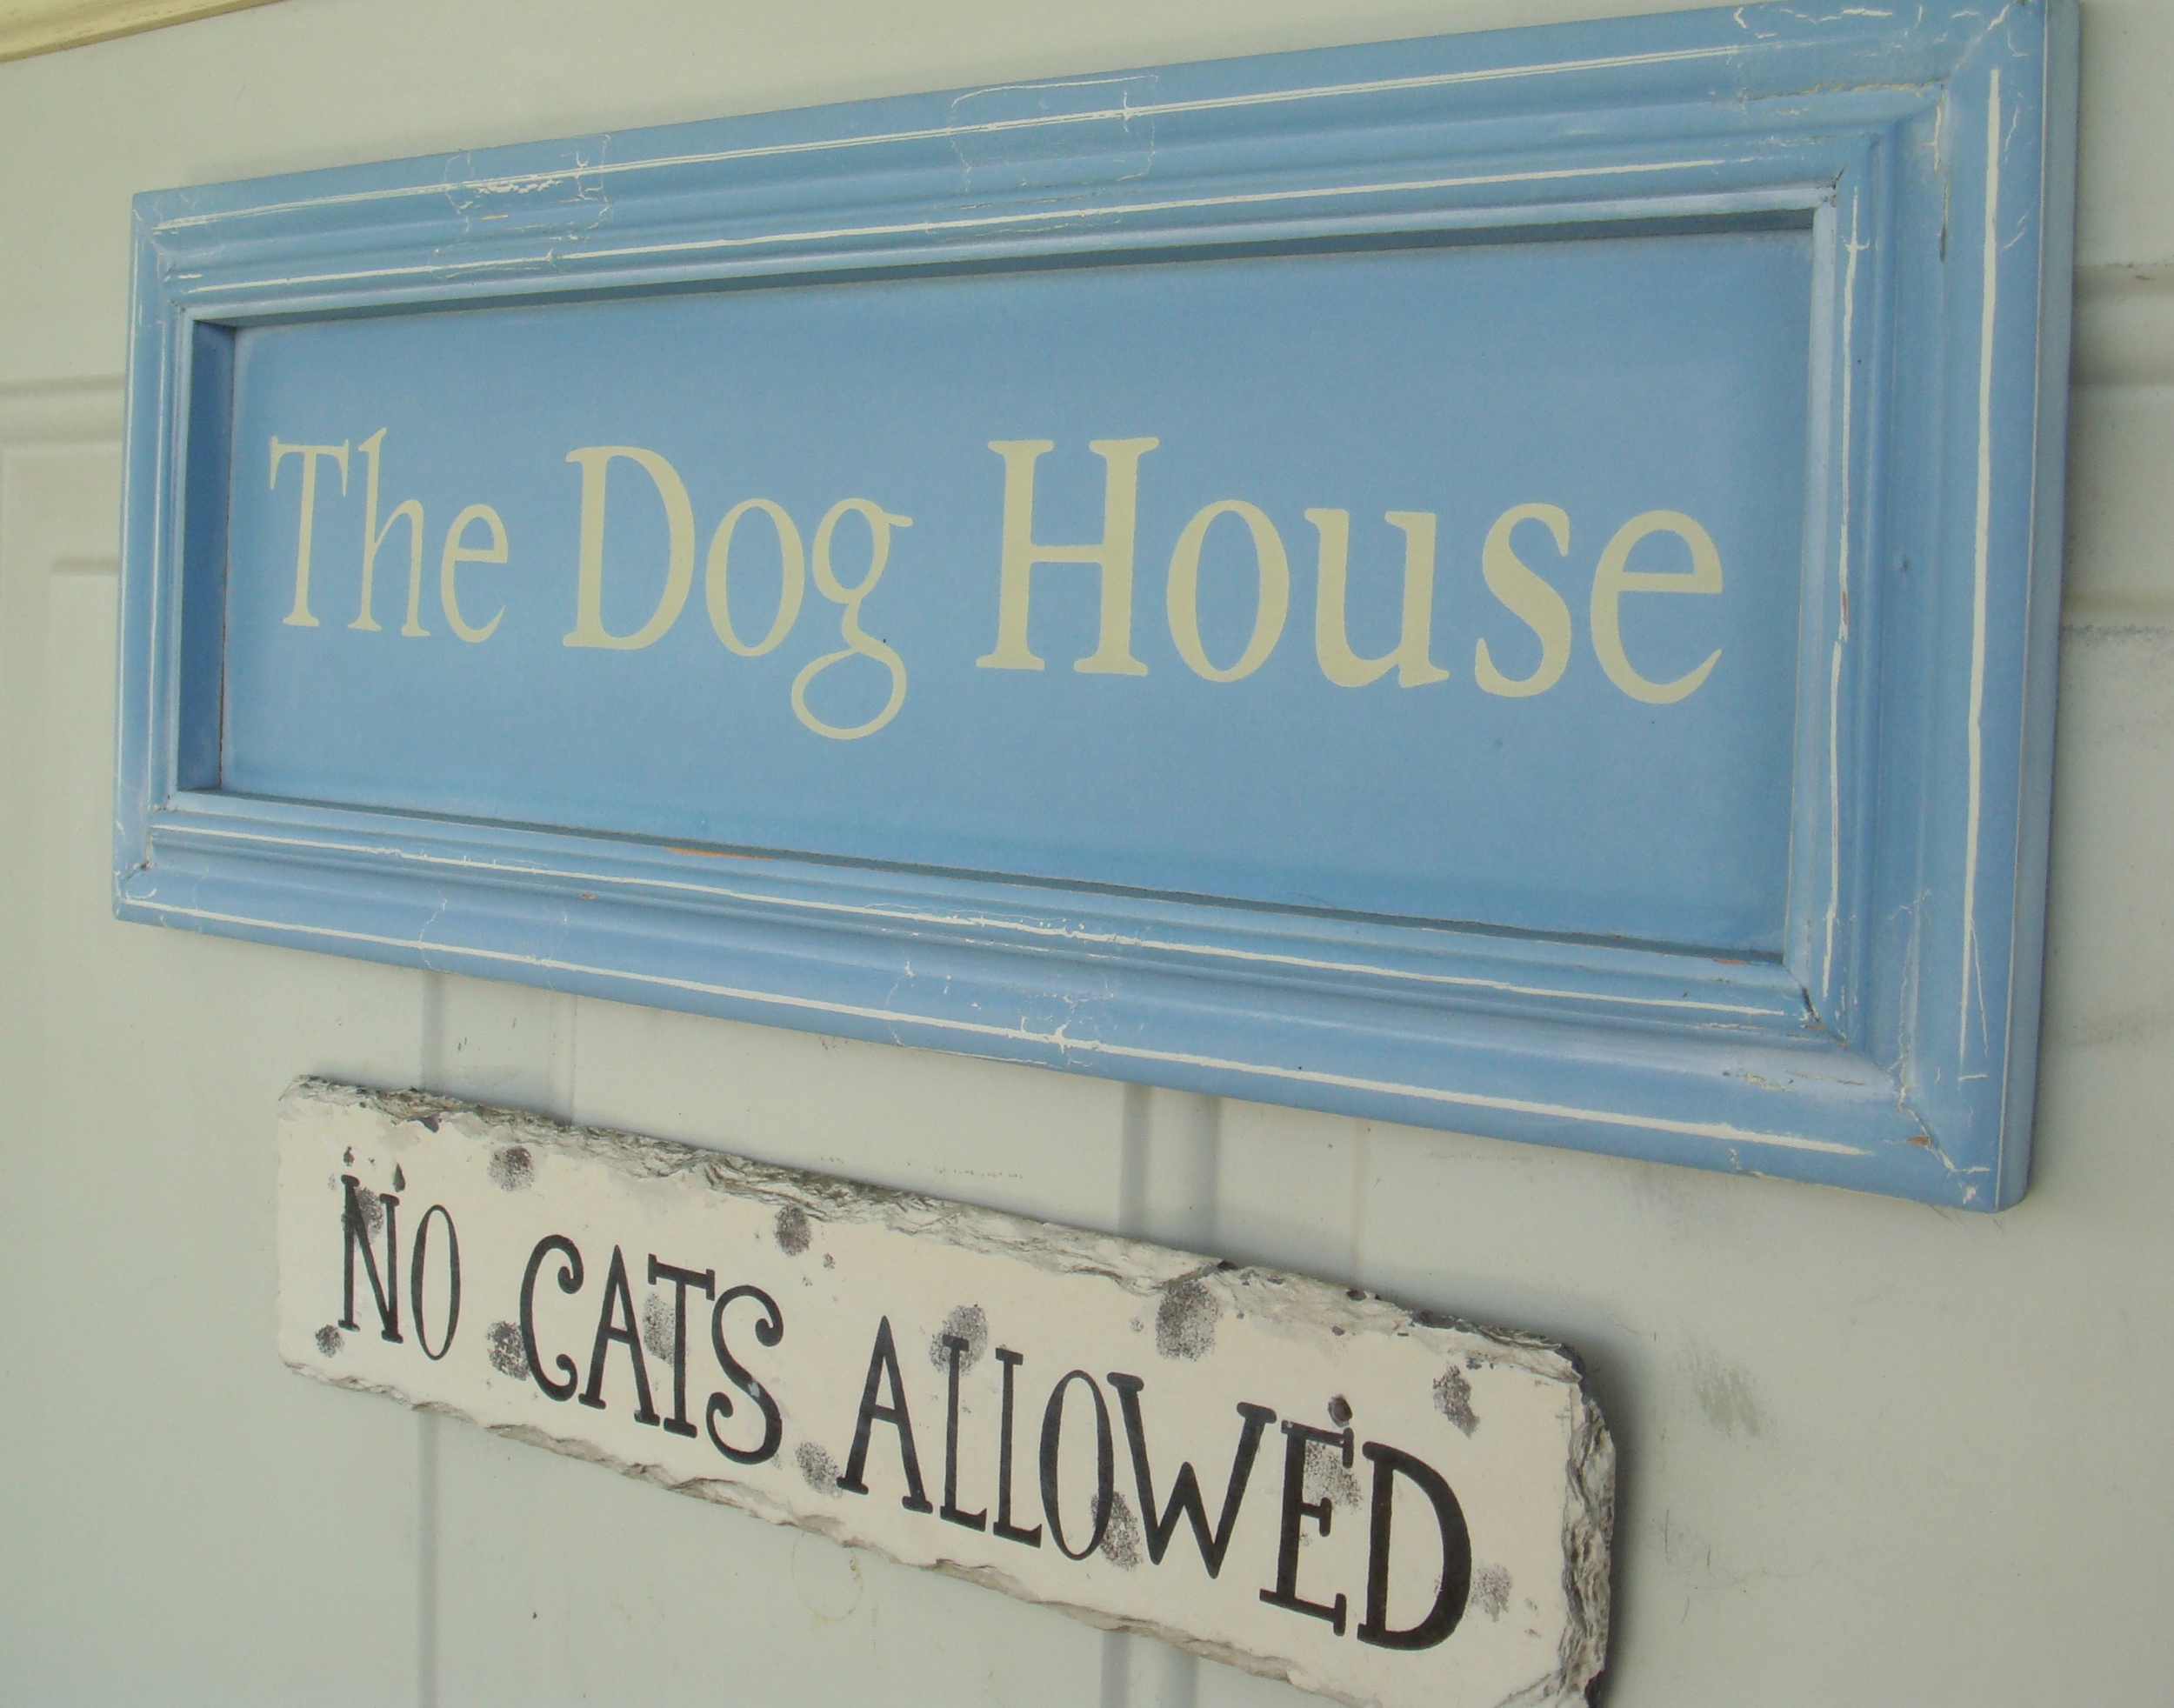 No Cats Allowed!